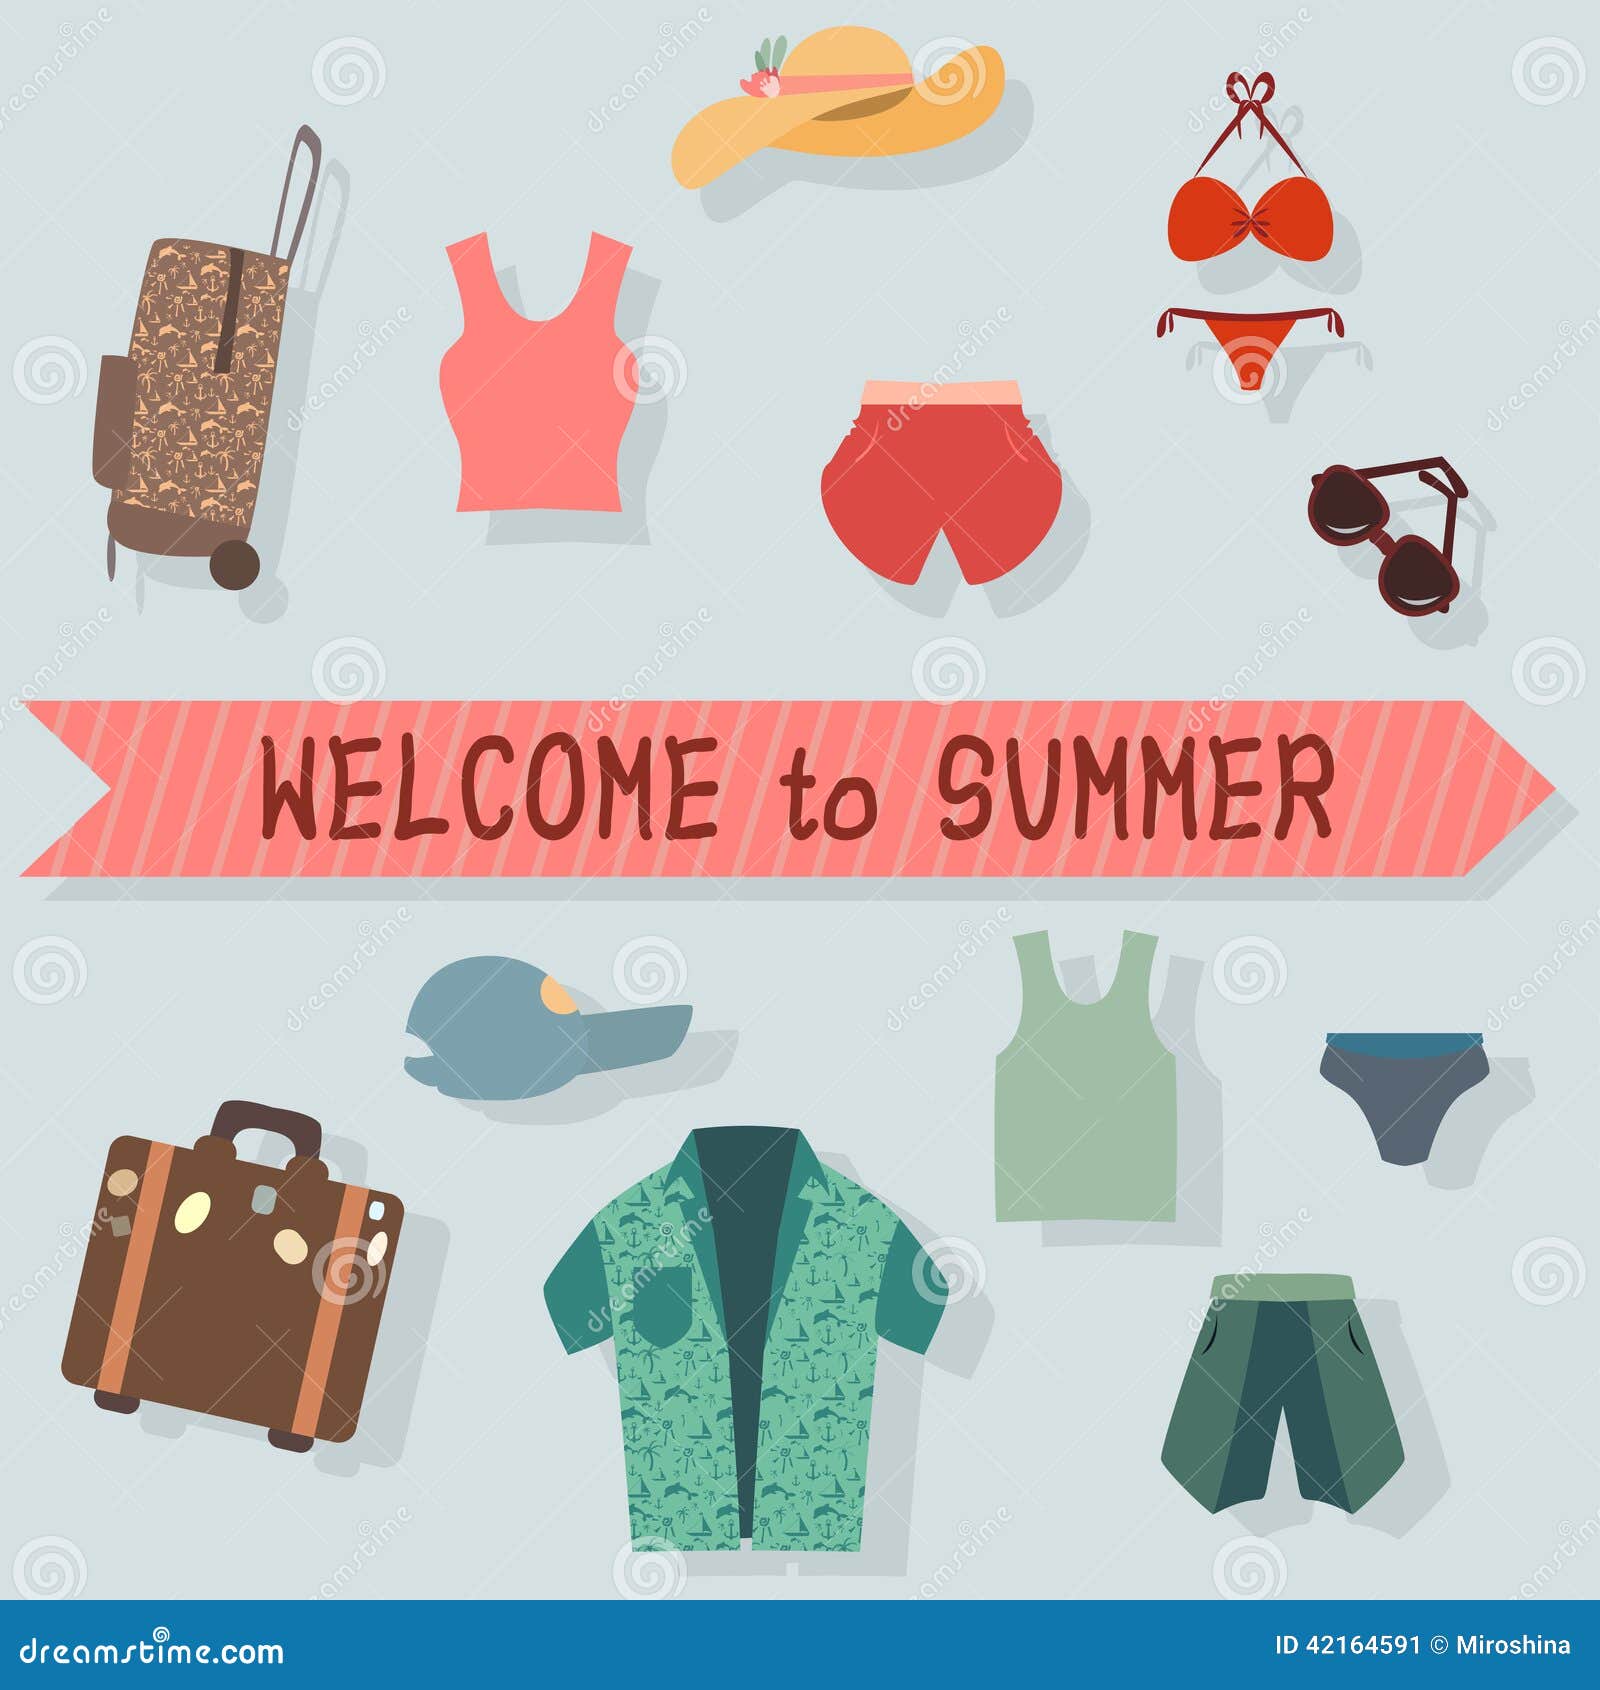 Flat Set of Beach Accessories Stock Vector - Illustration of abstract,  decorative: 42164591